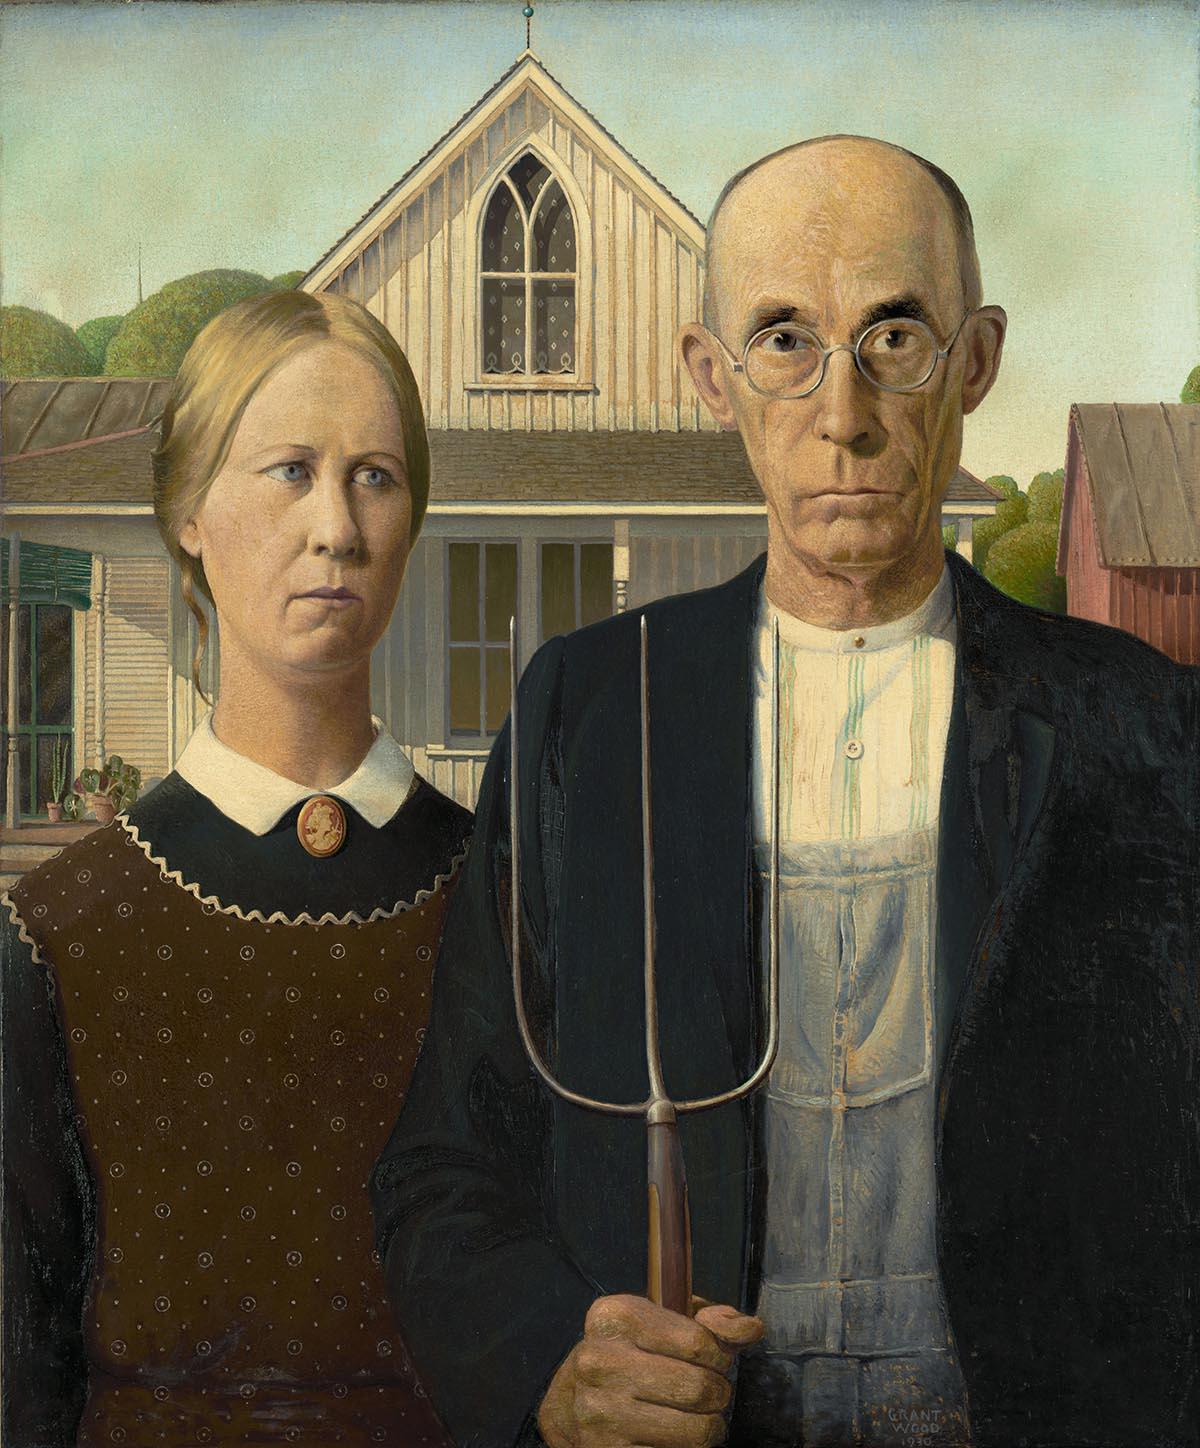 CoolWalls.ca Posters, Prints, & Visual Artwork American Gothic Grant Wood 1930 Vintage Artwork: Peel_n_Stick onto the wall, wallpaper like fabric